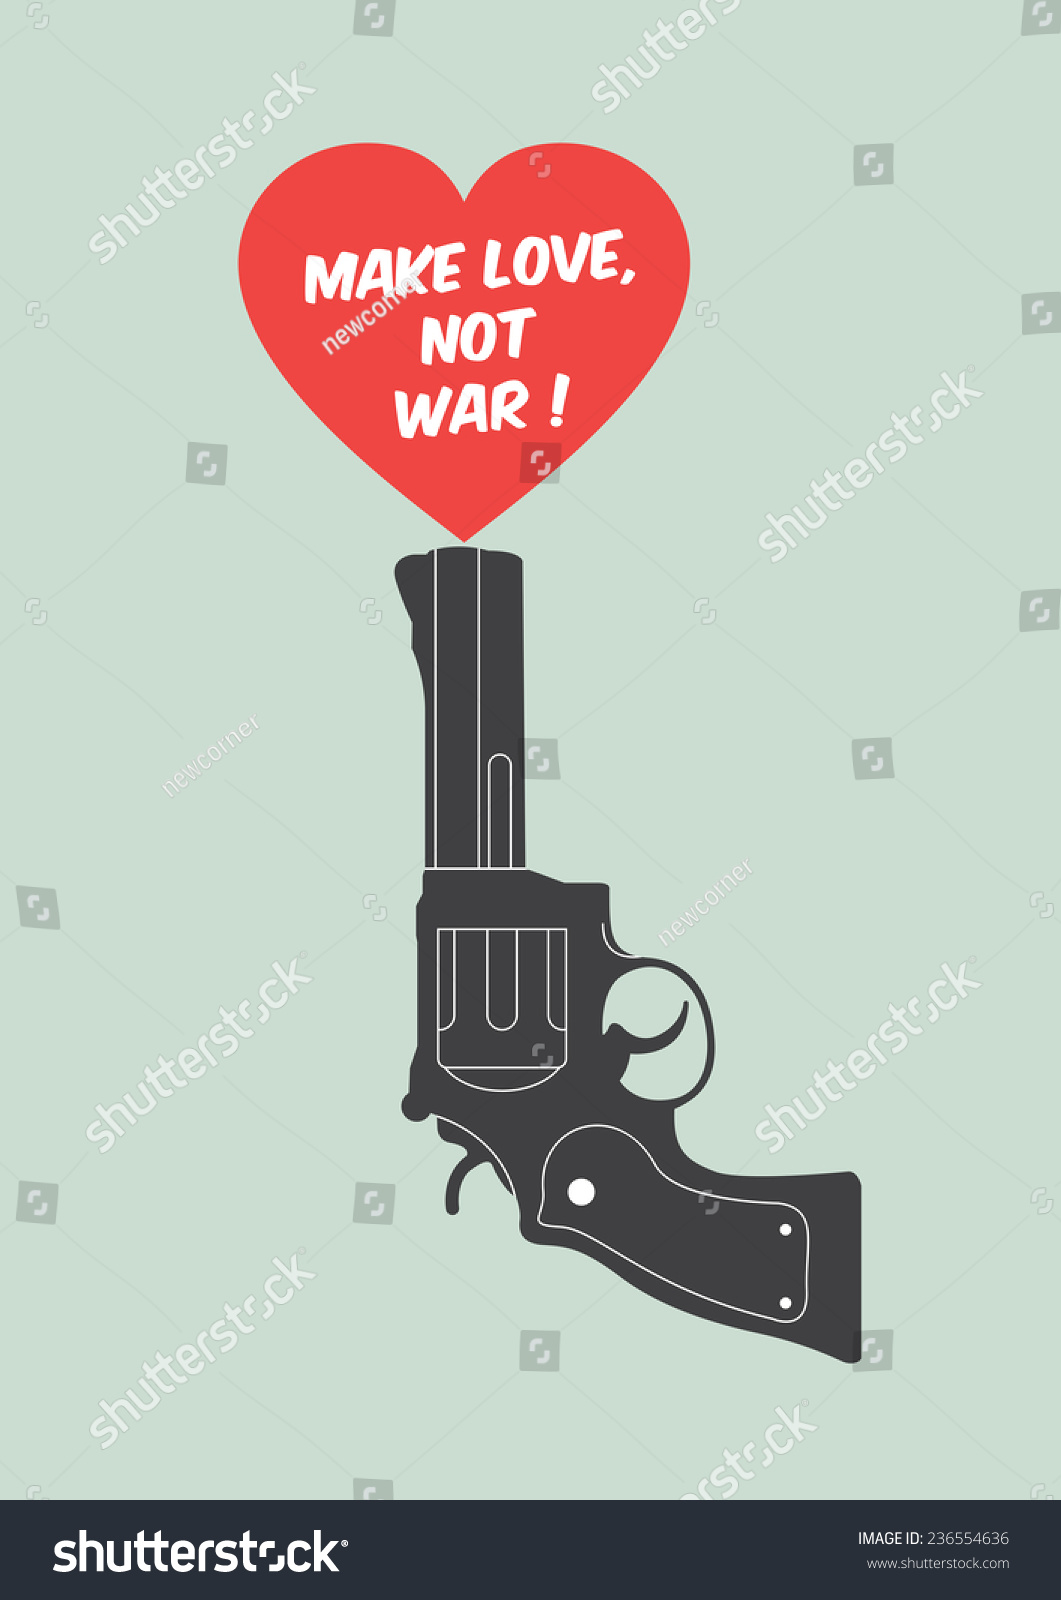 Quote poster with gun and heart Make love not war